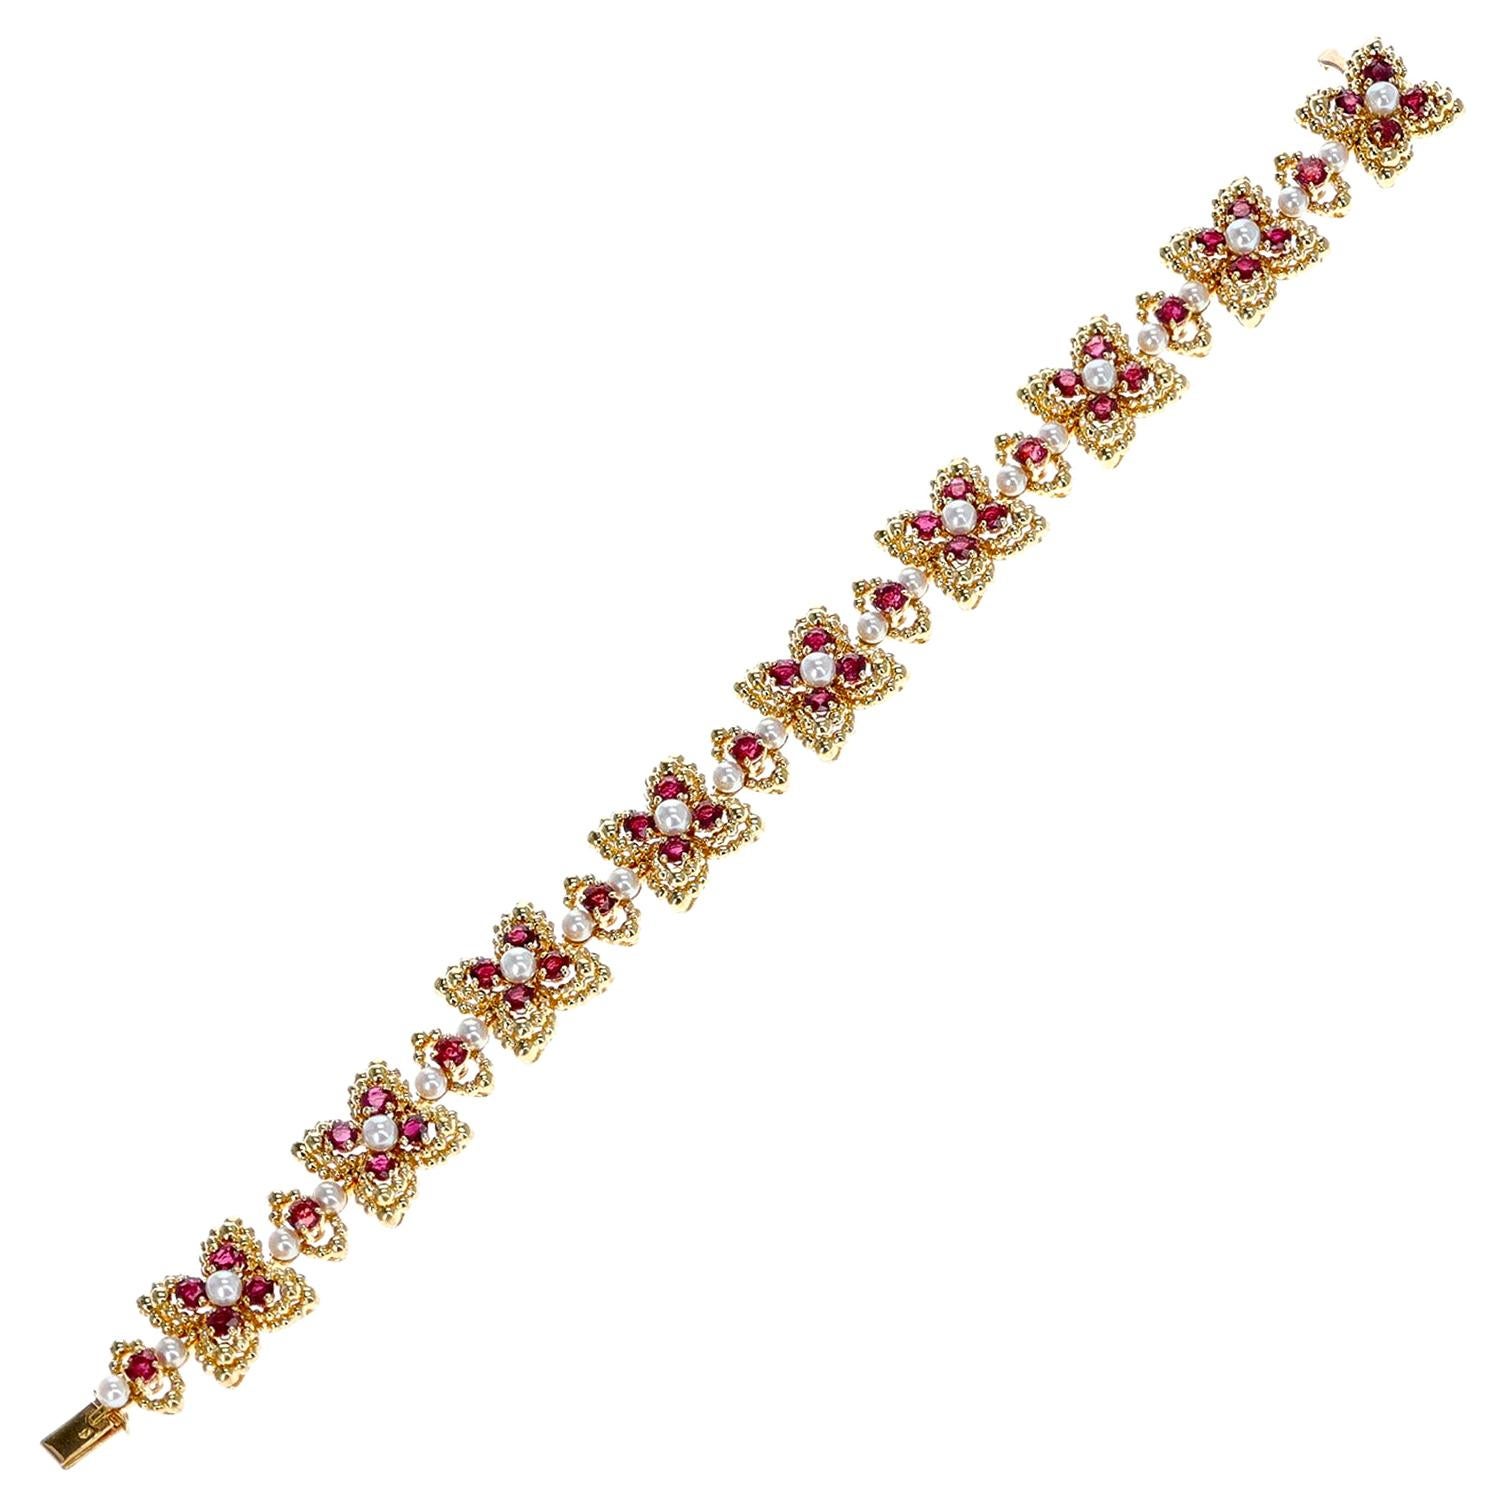 French Alexandre Reza 7.41 Ct. Ruby and Pearl Bracelet with French Marks, 18K